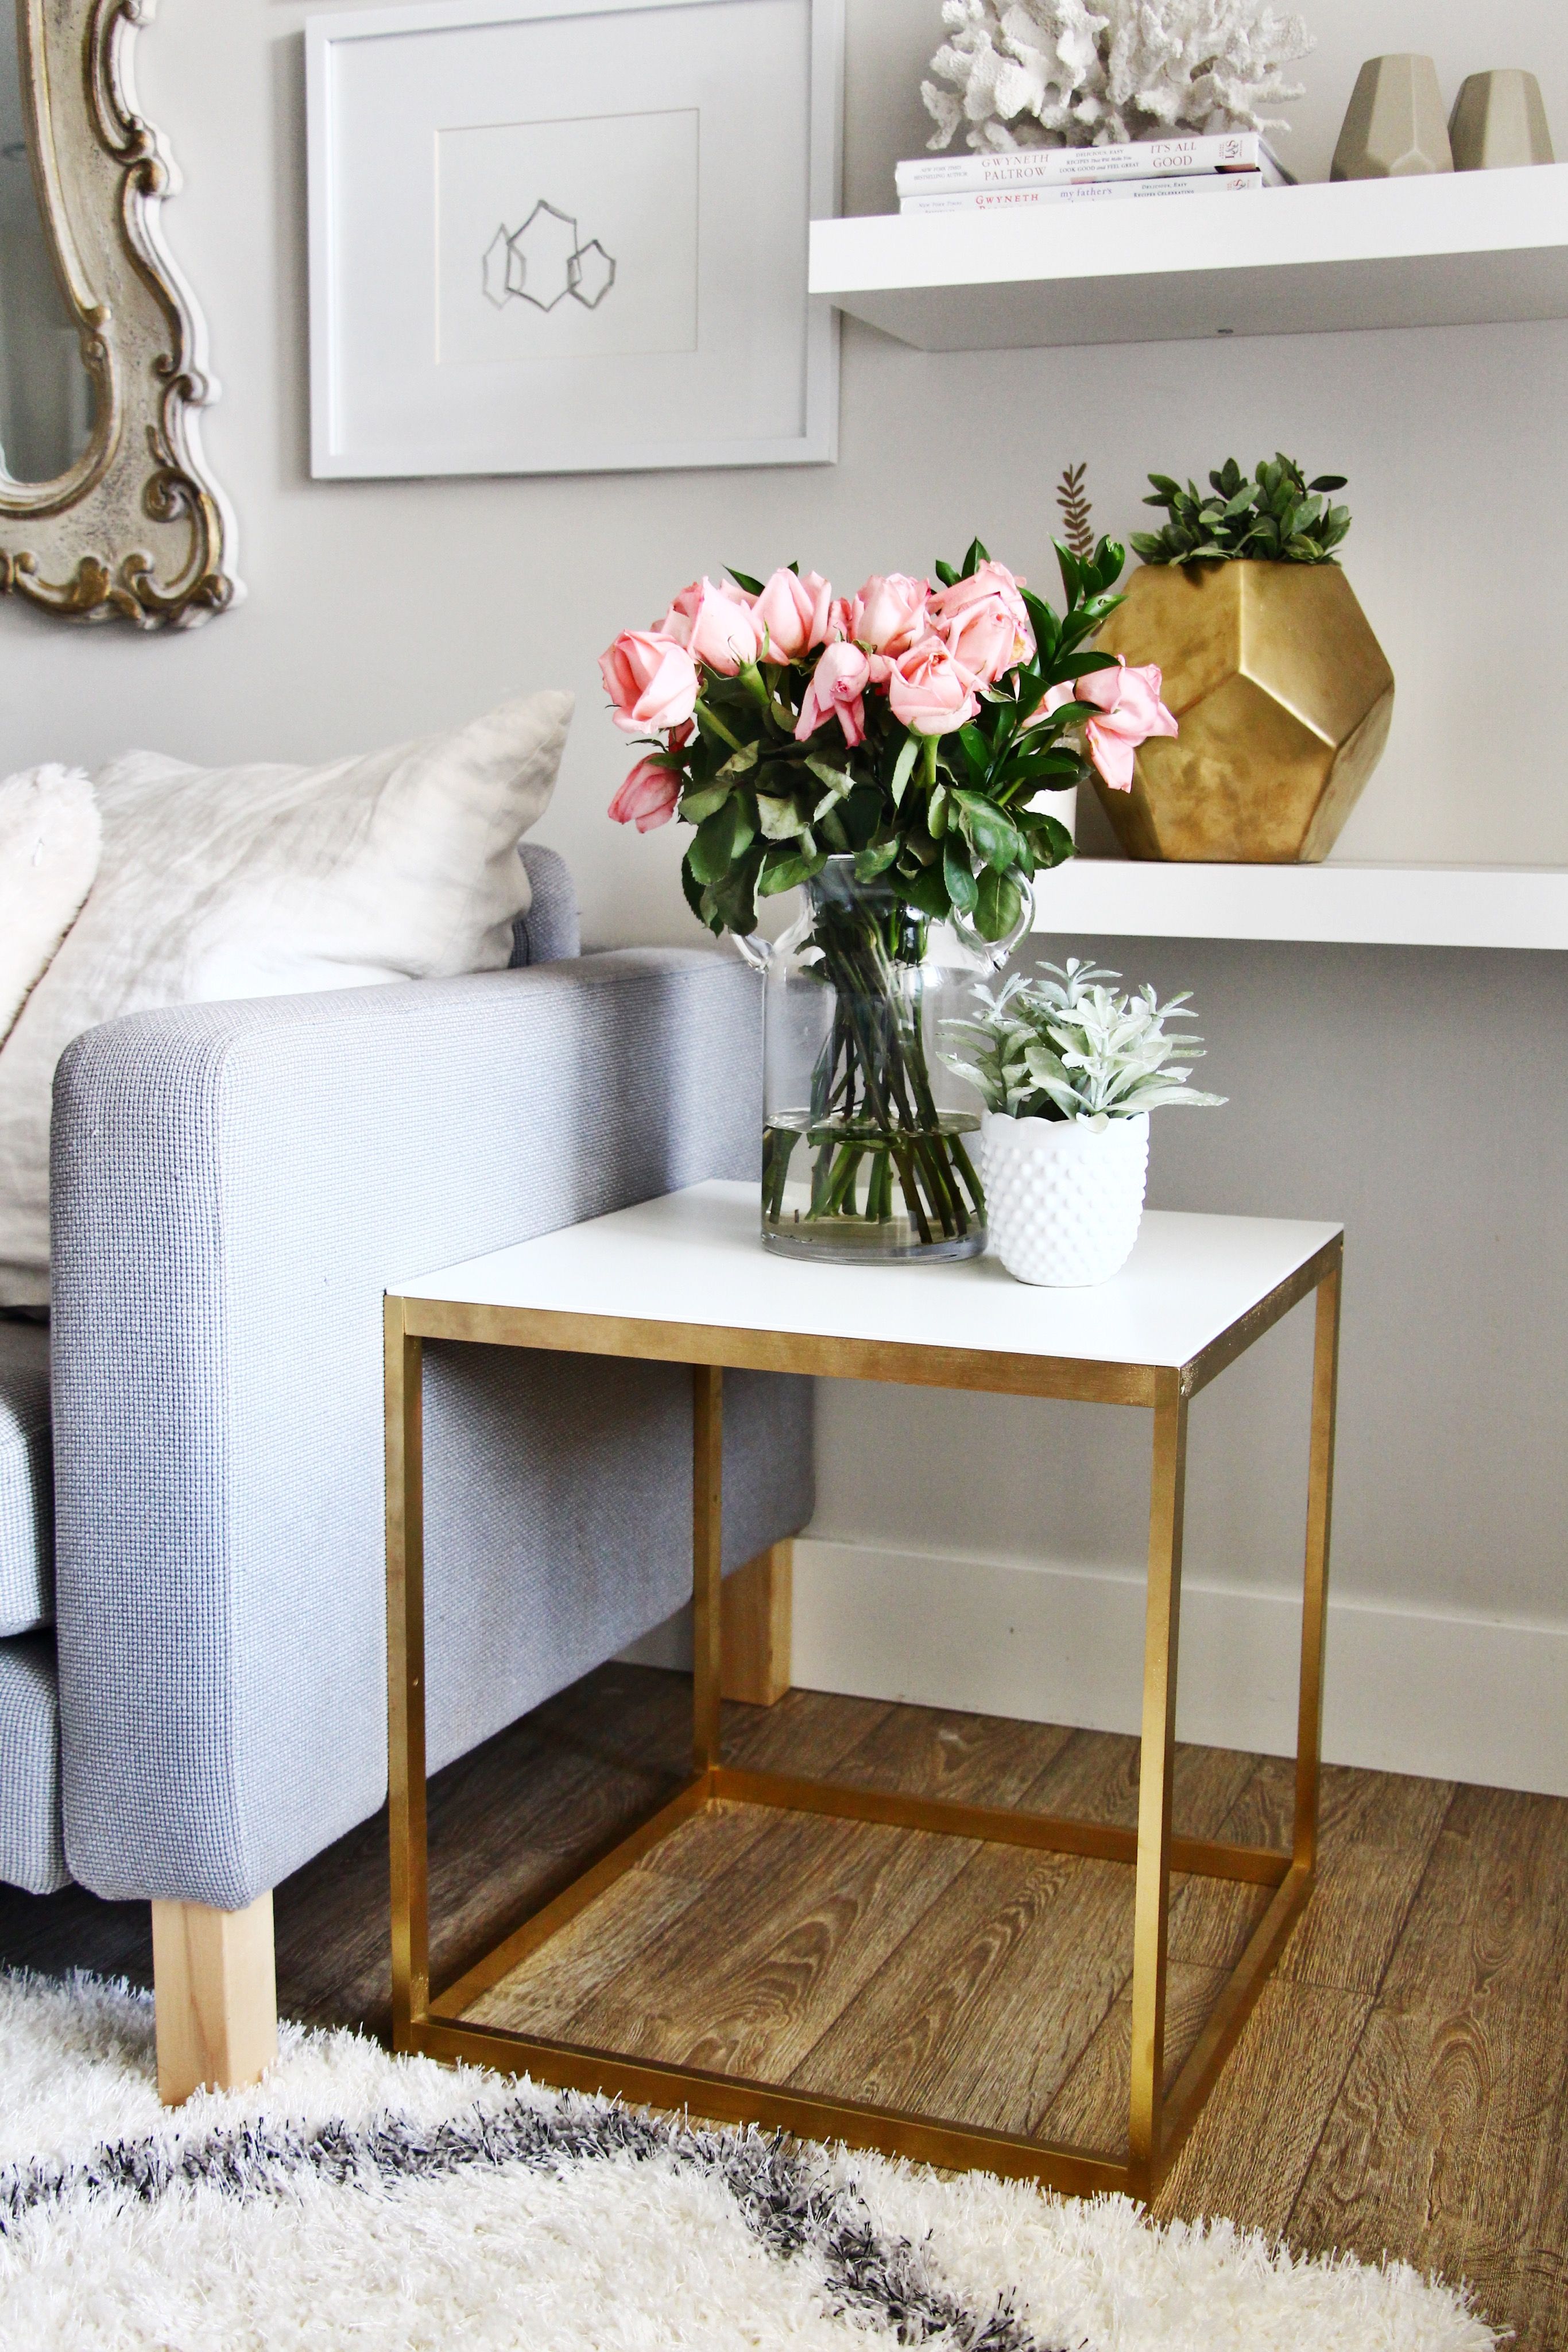 pin katie bain home where the heart decor diy gold accent table ikea side hack interiordesign casegoodsideas moder interior design ideas usb end vintage french bedside tables